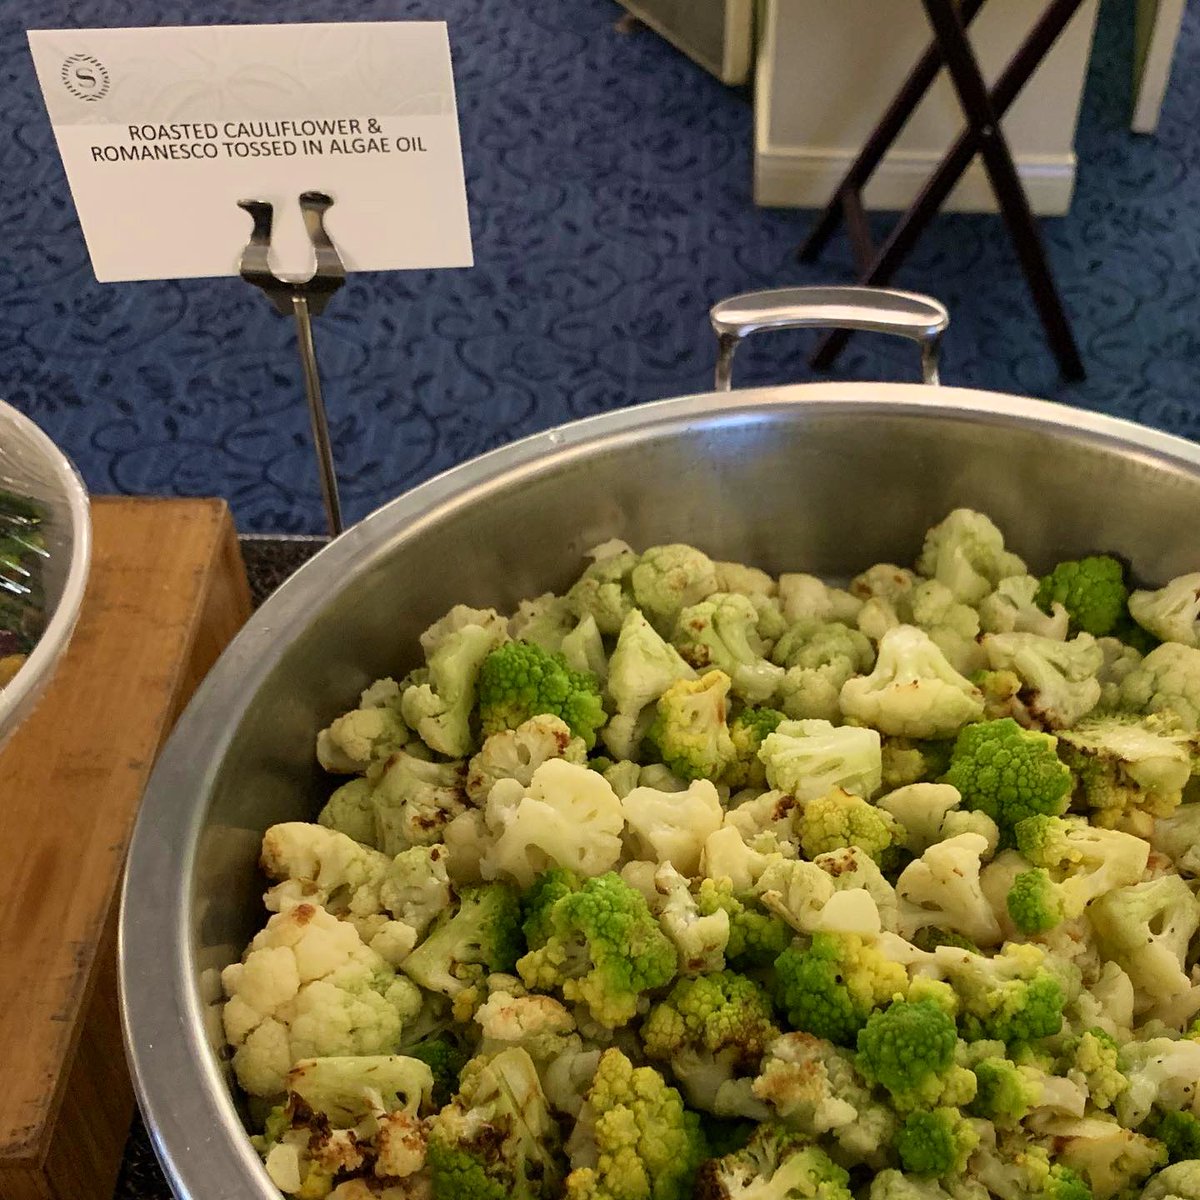 Triton’s algae has many applications. Today at #TMABlueTech algae chimichurri, algae and herb marinated chicken breast, and and algae oil were enjoyed in dishes. #Sustainability #NewProteins #Nutrition